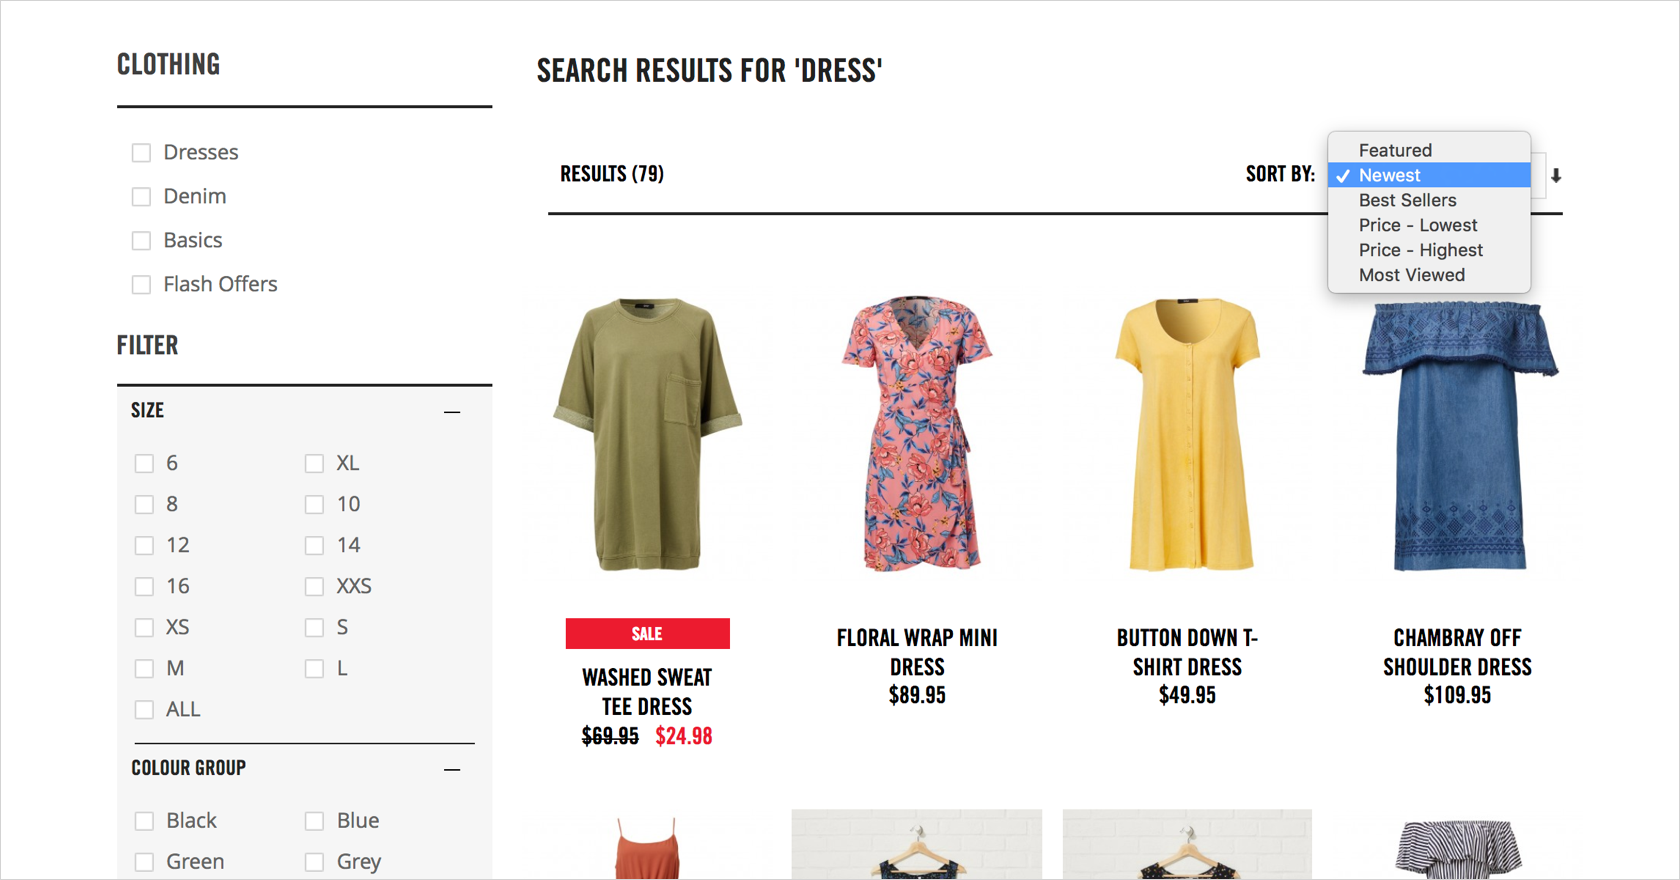 Designing e-commerce websites: filtering search results